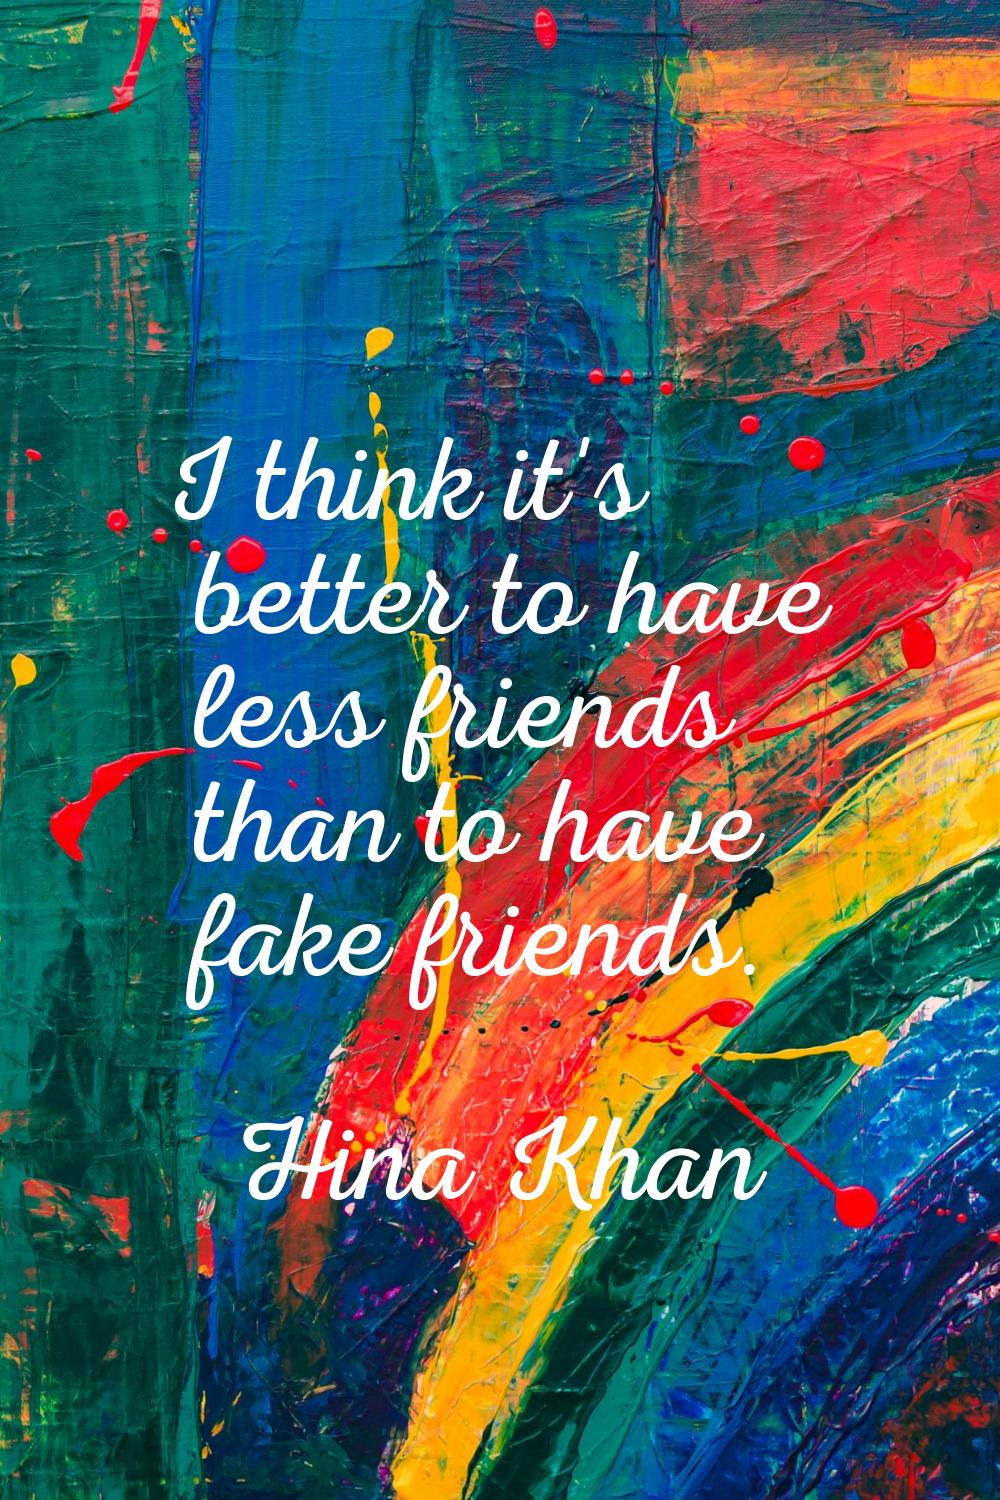 I think it's better to have less friends than to have fake friends.